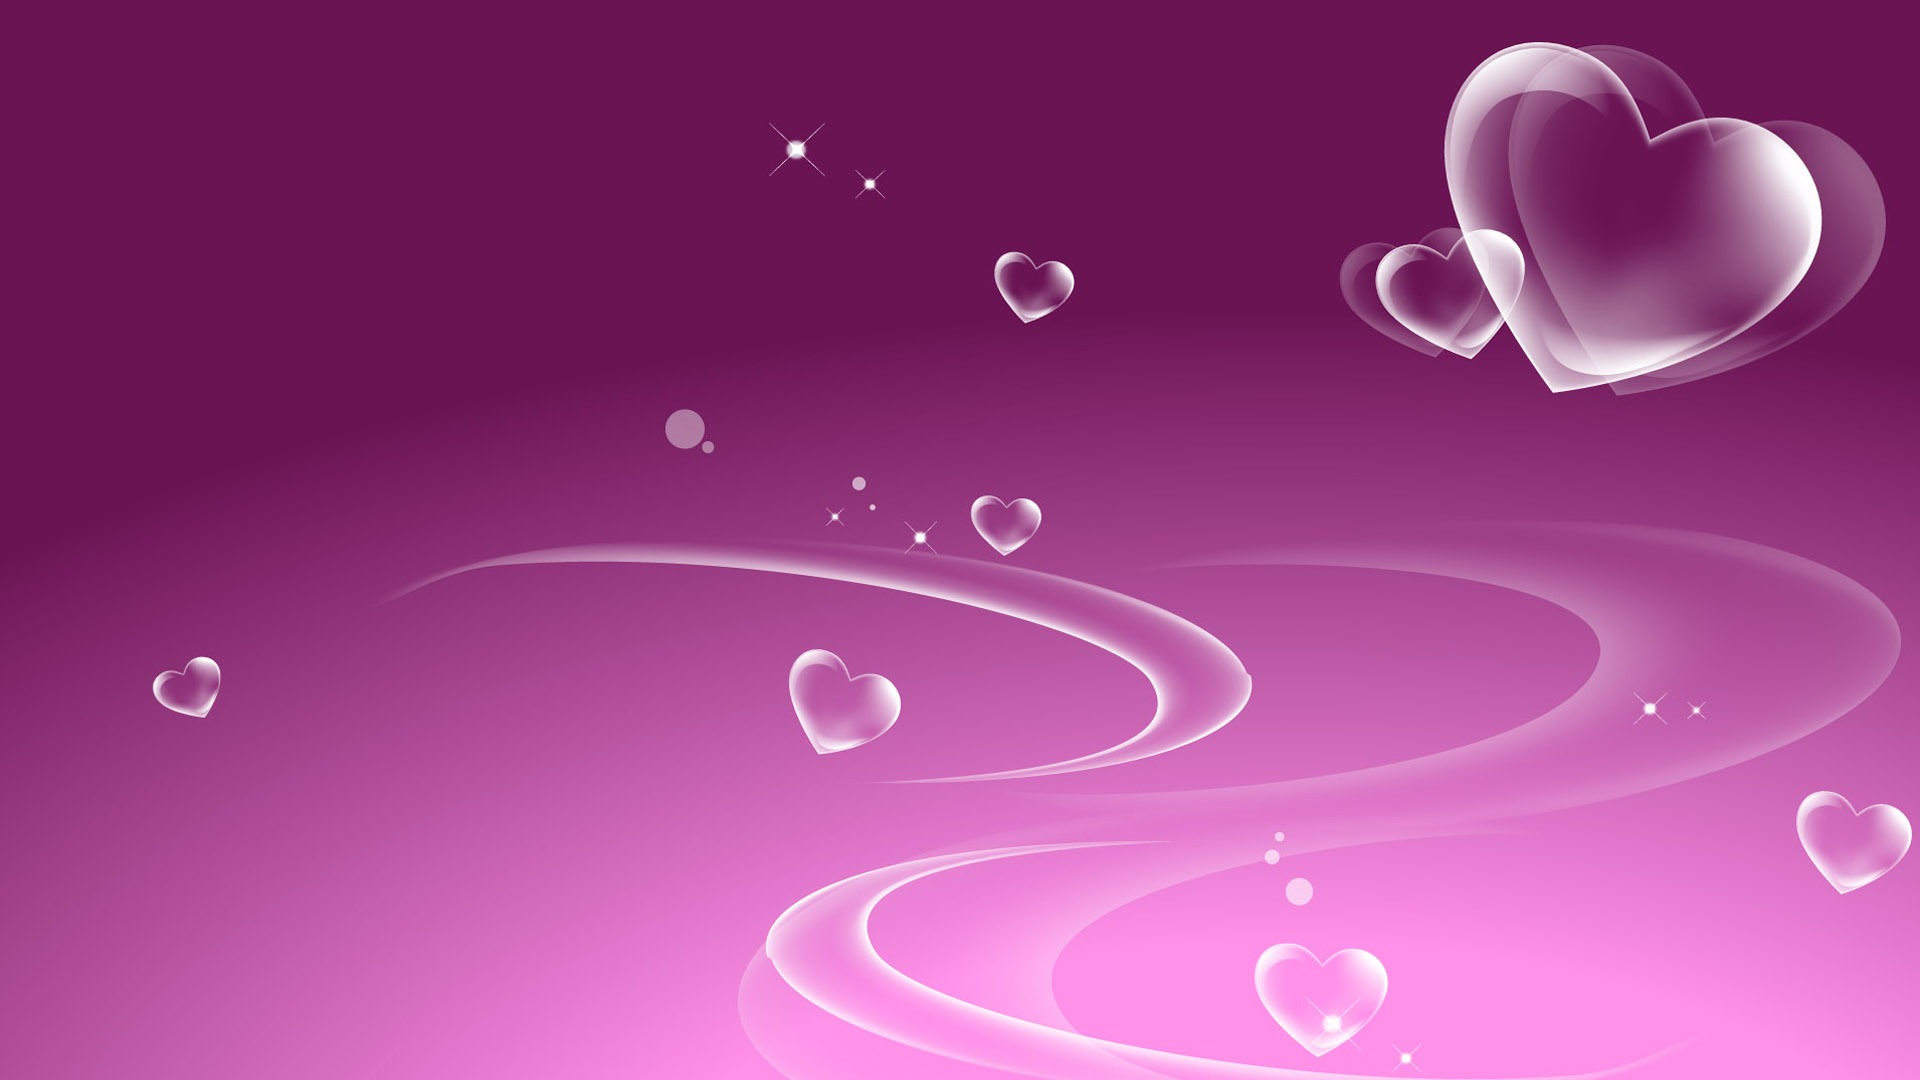 Colorful vector background wallpaper (3) #10 - 1920x1080